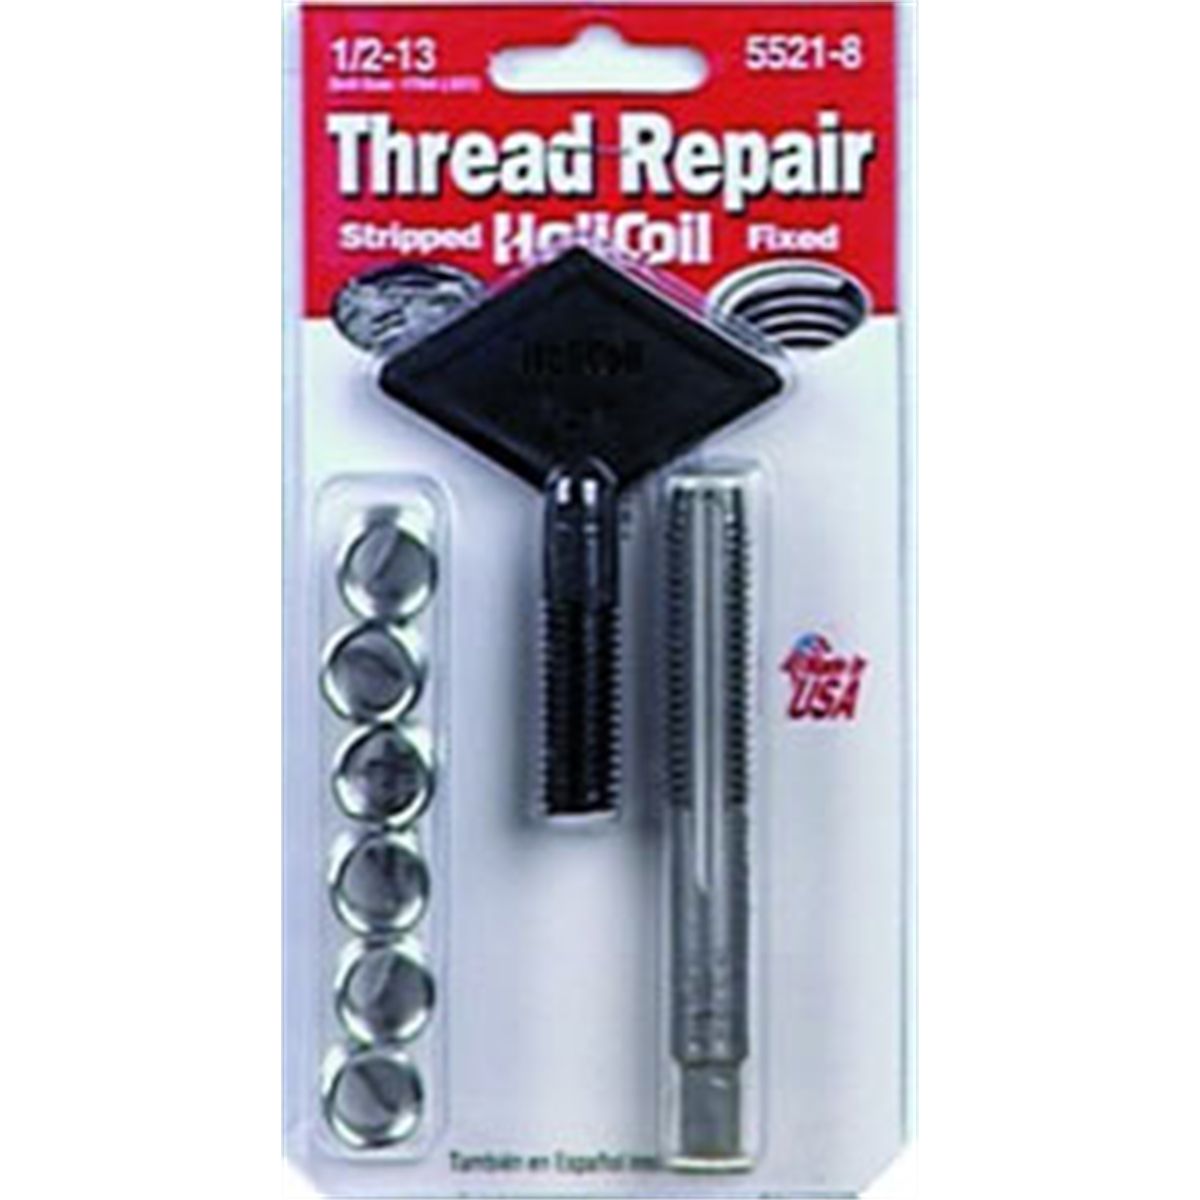 Helicoil Thread Repair Kit 5521-8 With Inserts 1/2-13 for sale online